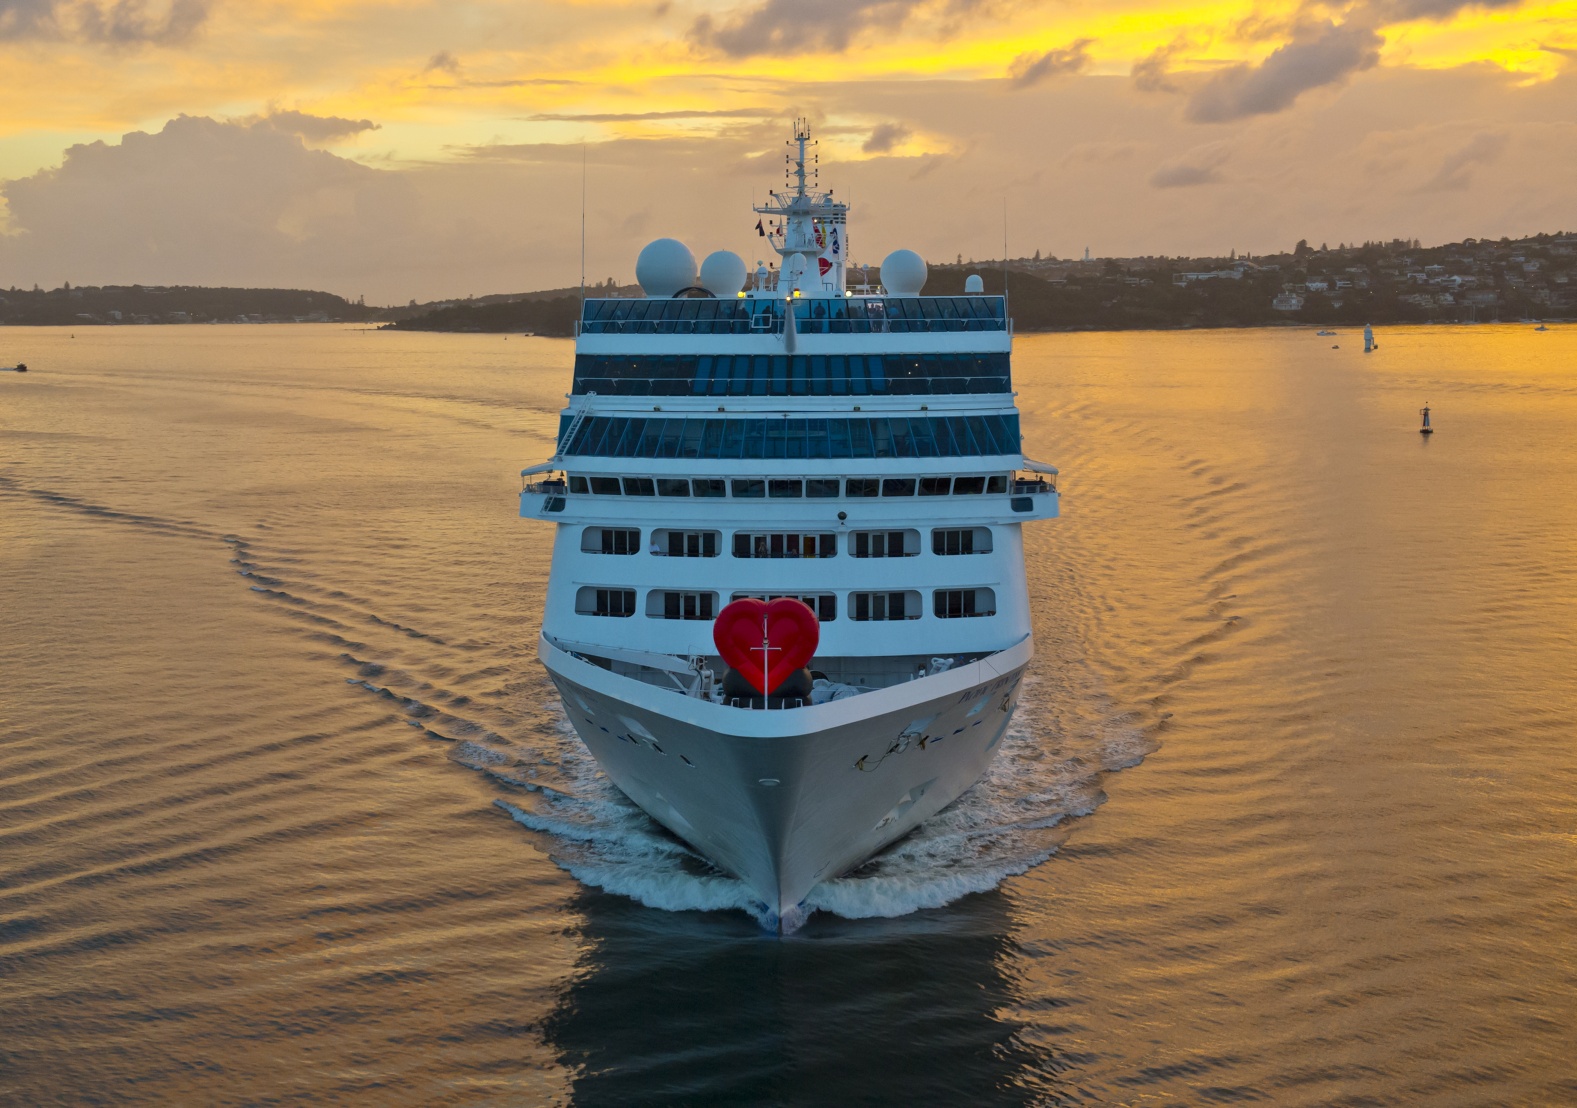 "The Love Boat" Pacific Princess has been sold to Azamara Cruise